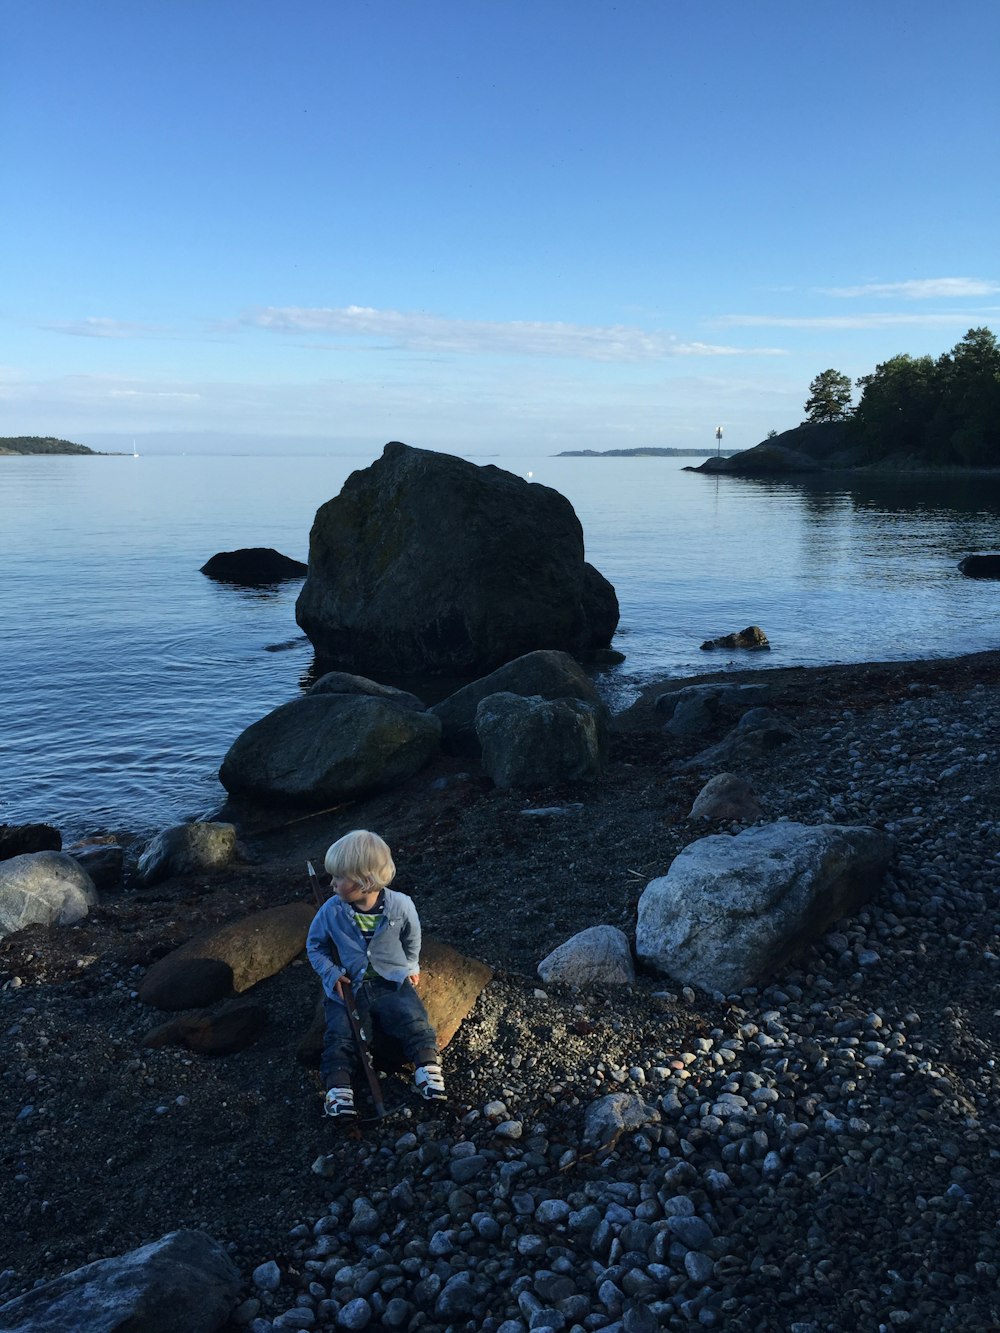 woman in blue jacket sitting on rock near body of water during daytime